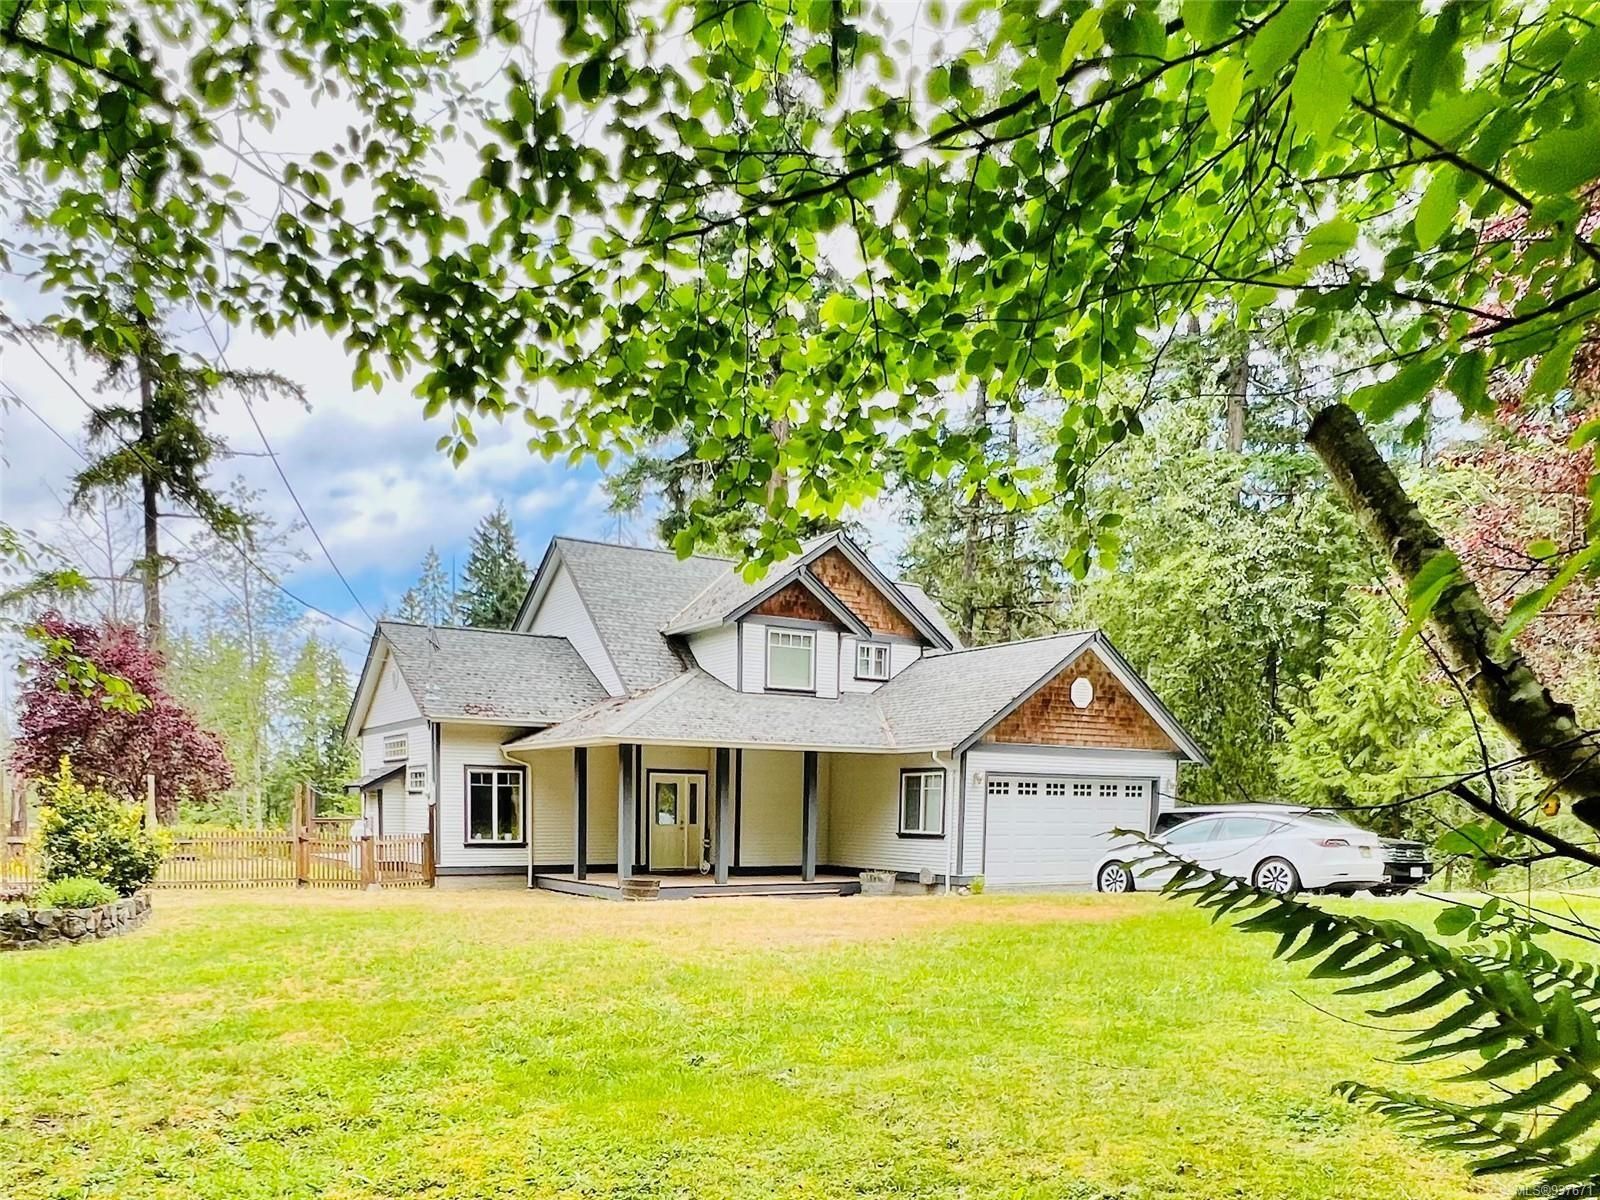 New property listed in ML Shawnigan, Malahat & Area